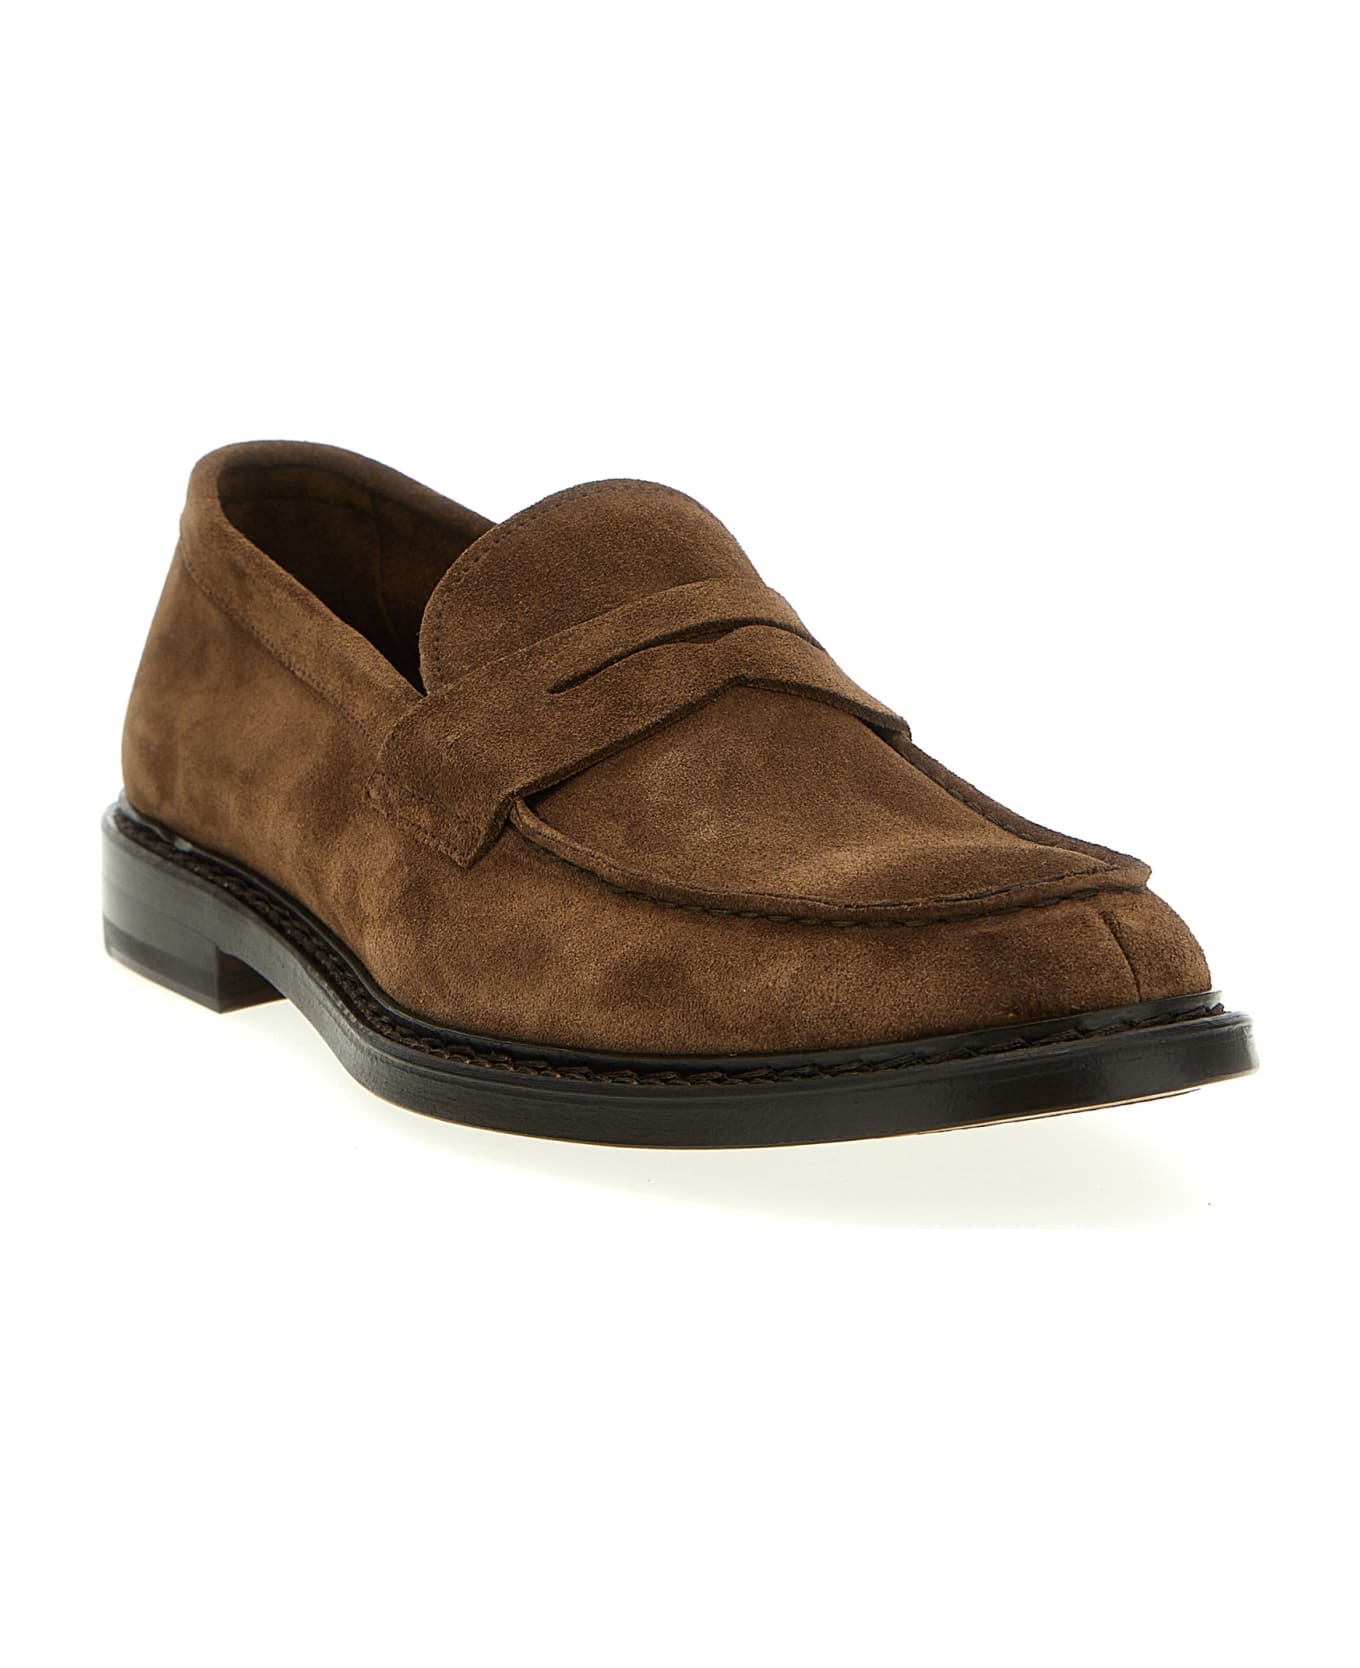 Doucal's Suede Loafers Doucal's - BROWN ローファー＆デッキシューズ